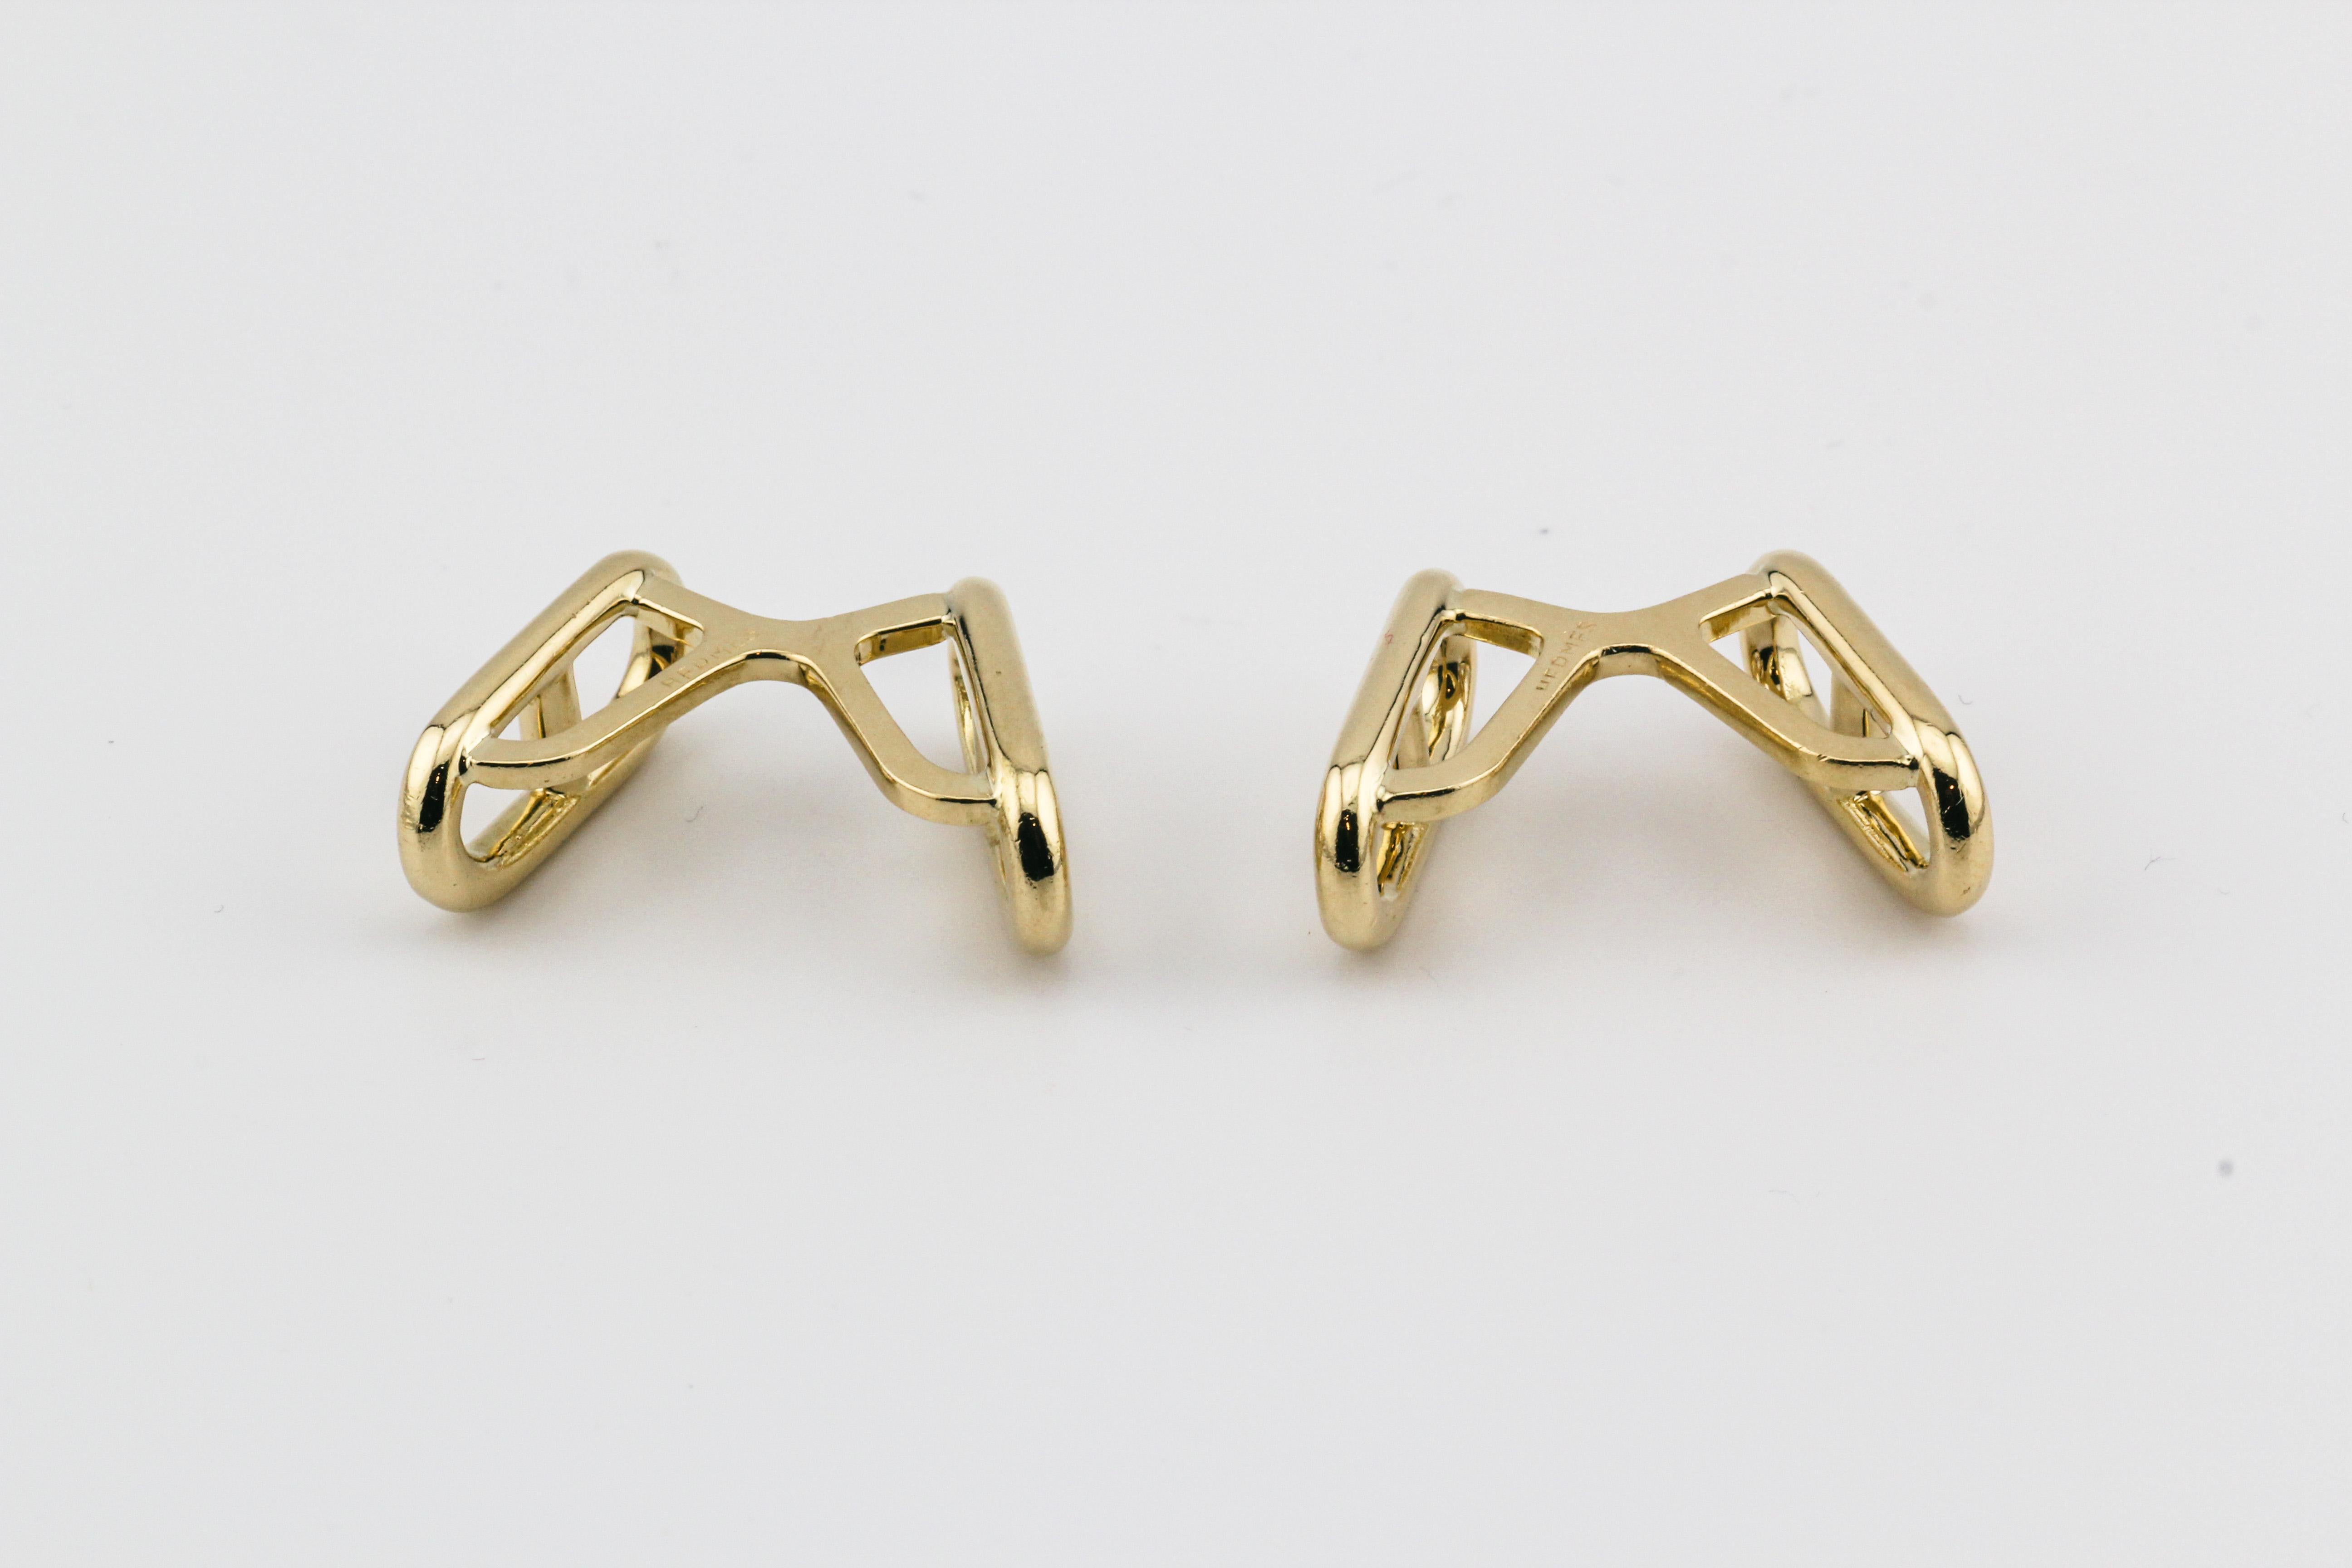 Hermes Vintage 1970s Chaine D'Ancre 18k Gold Cufflinks In Good Condition For Sale In Bellmore, NY